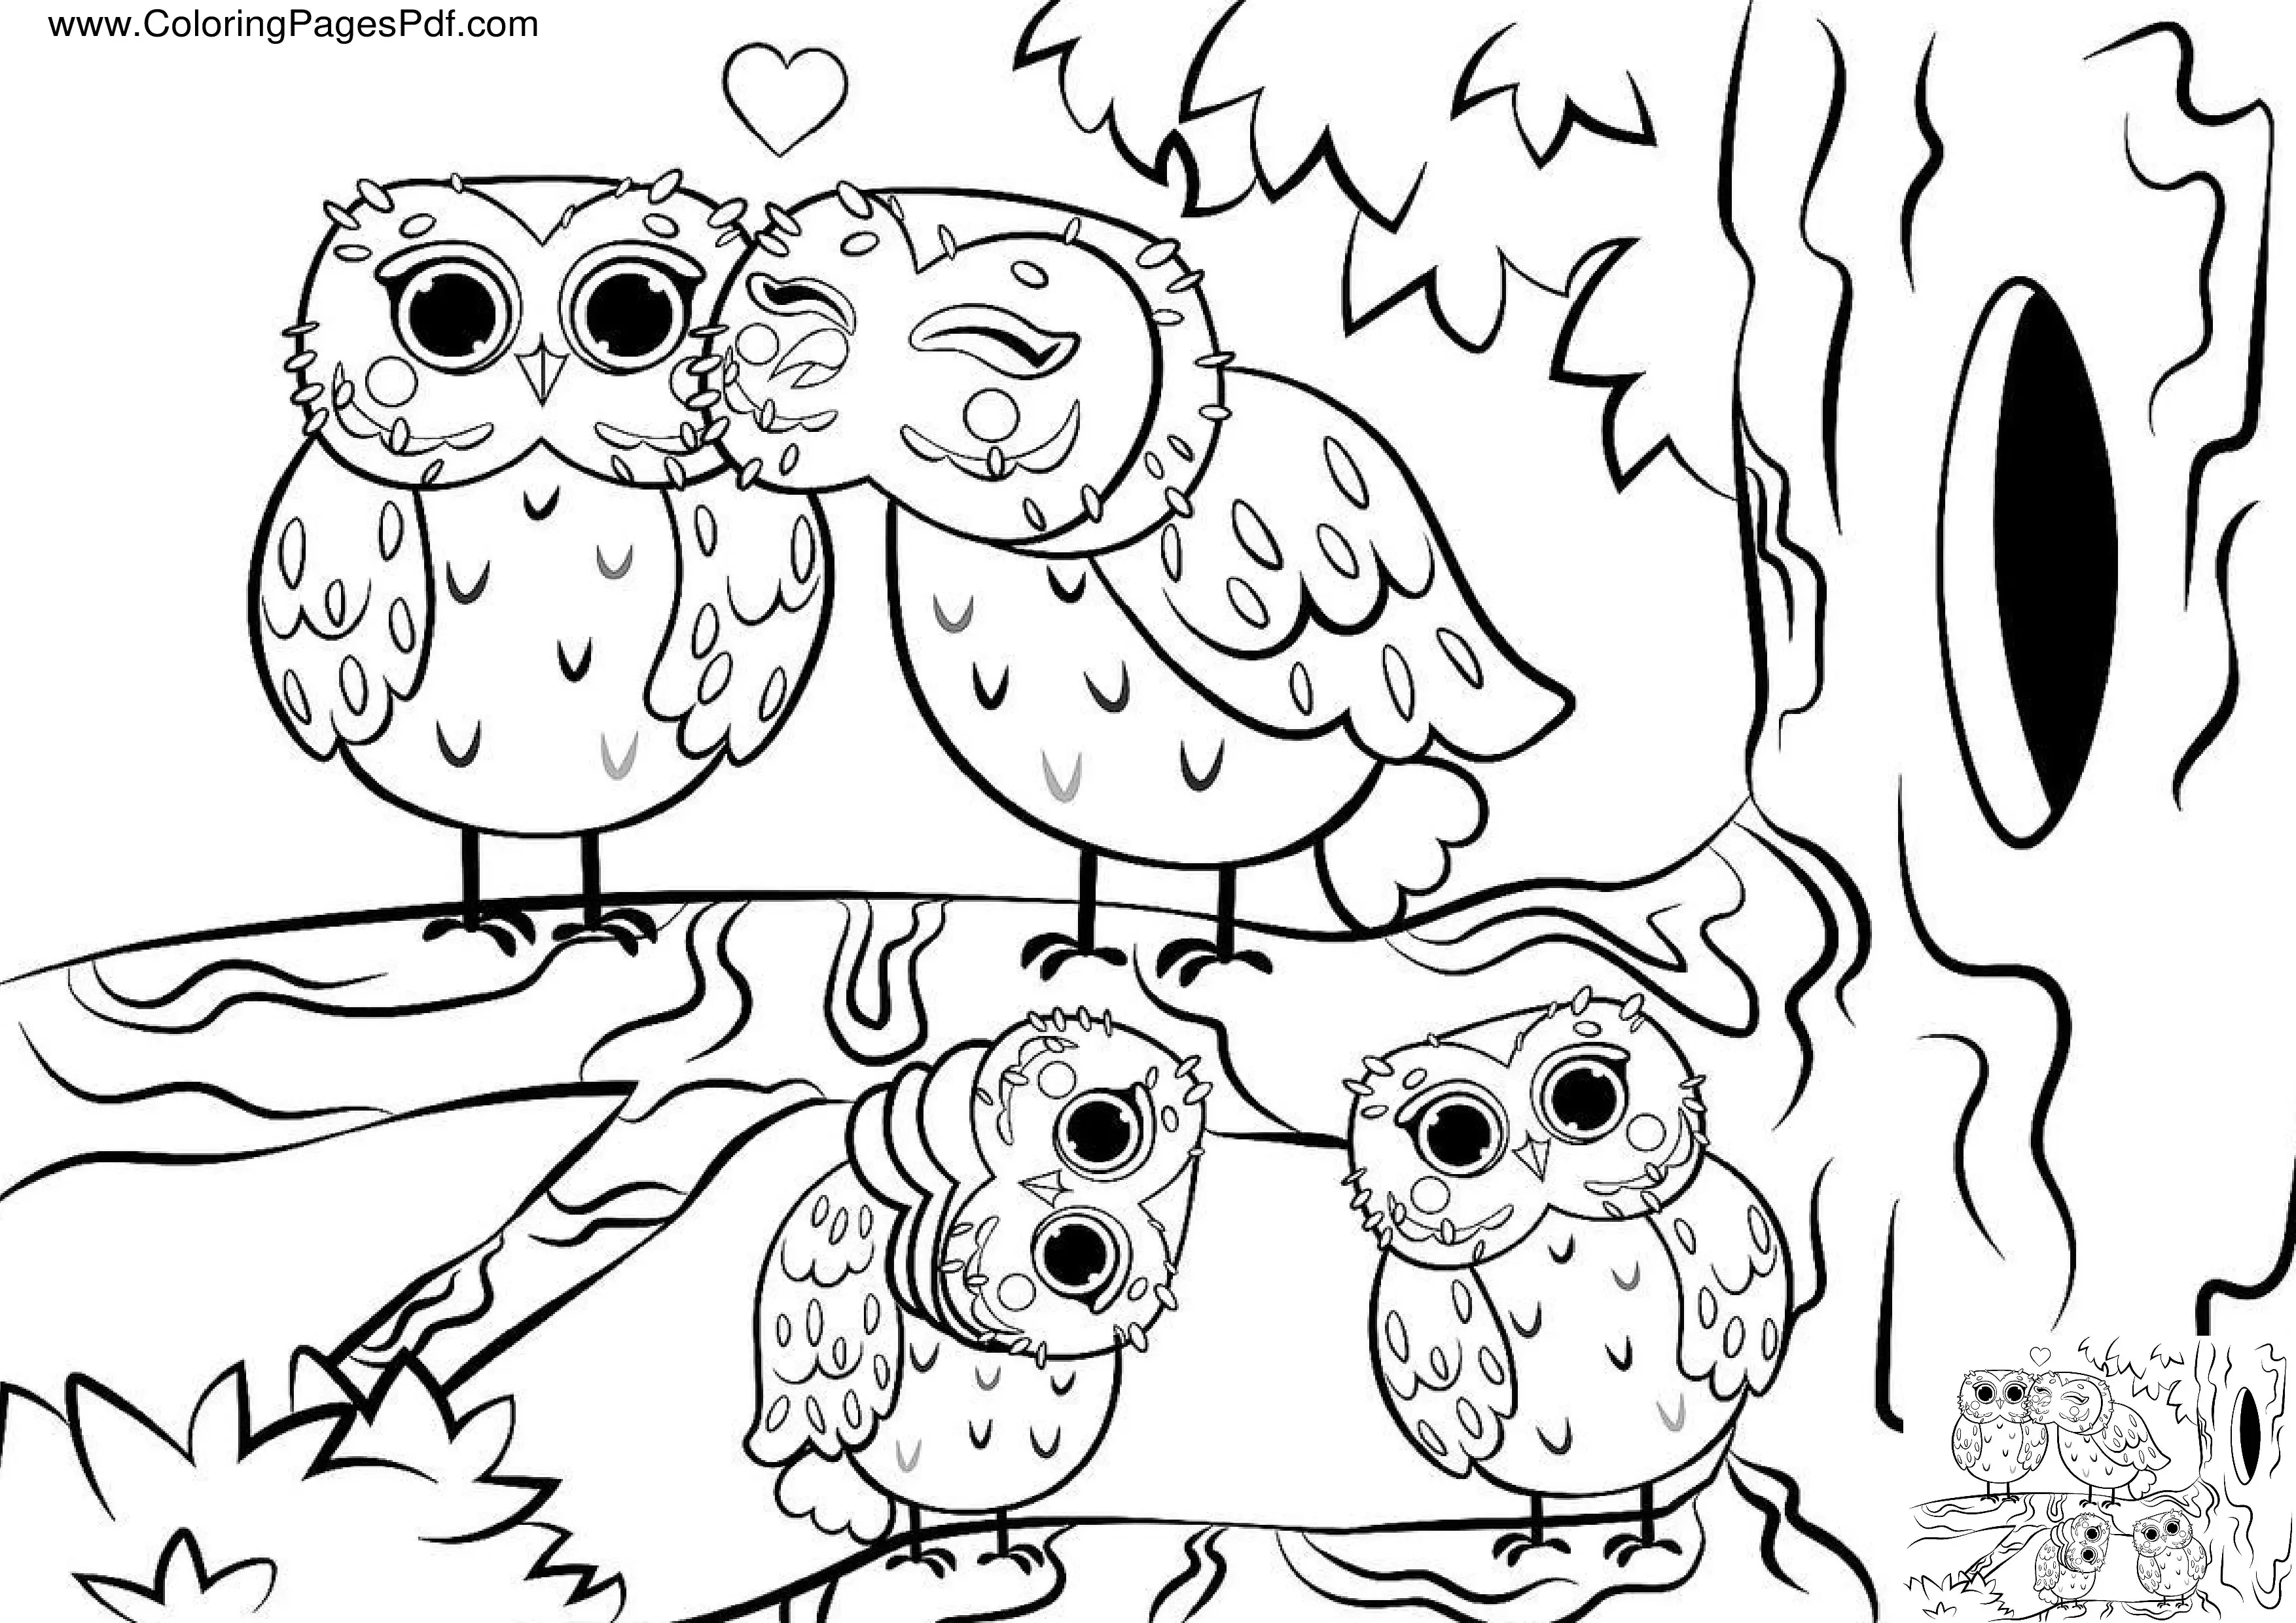 Free owl coloring pages for adults